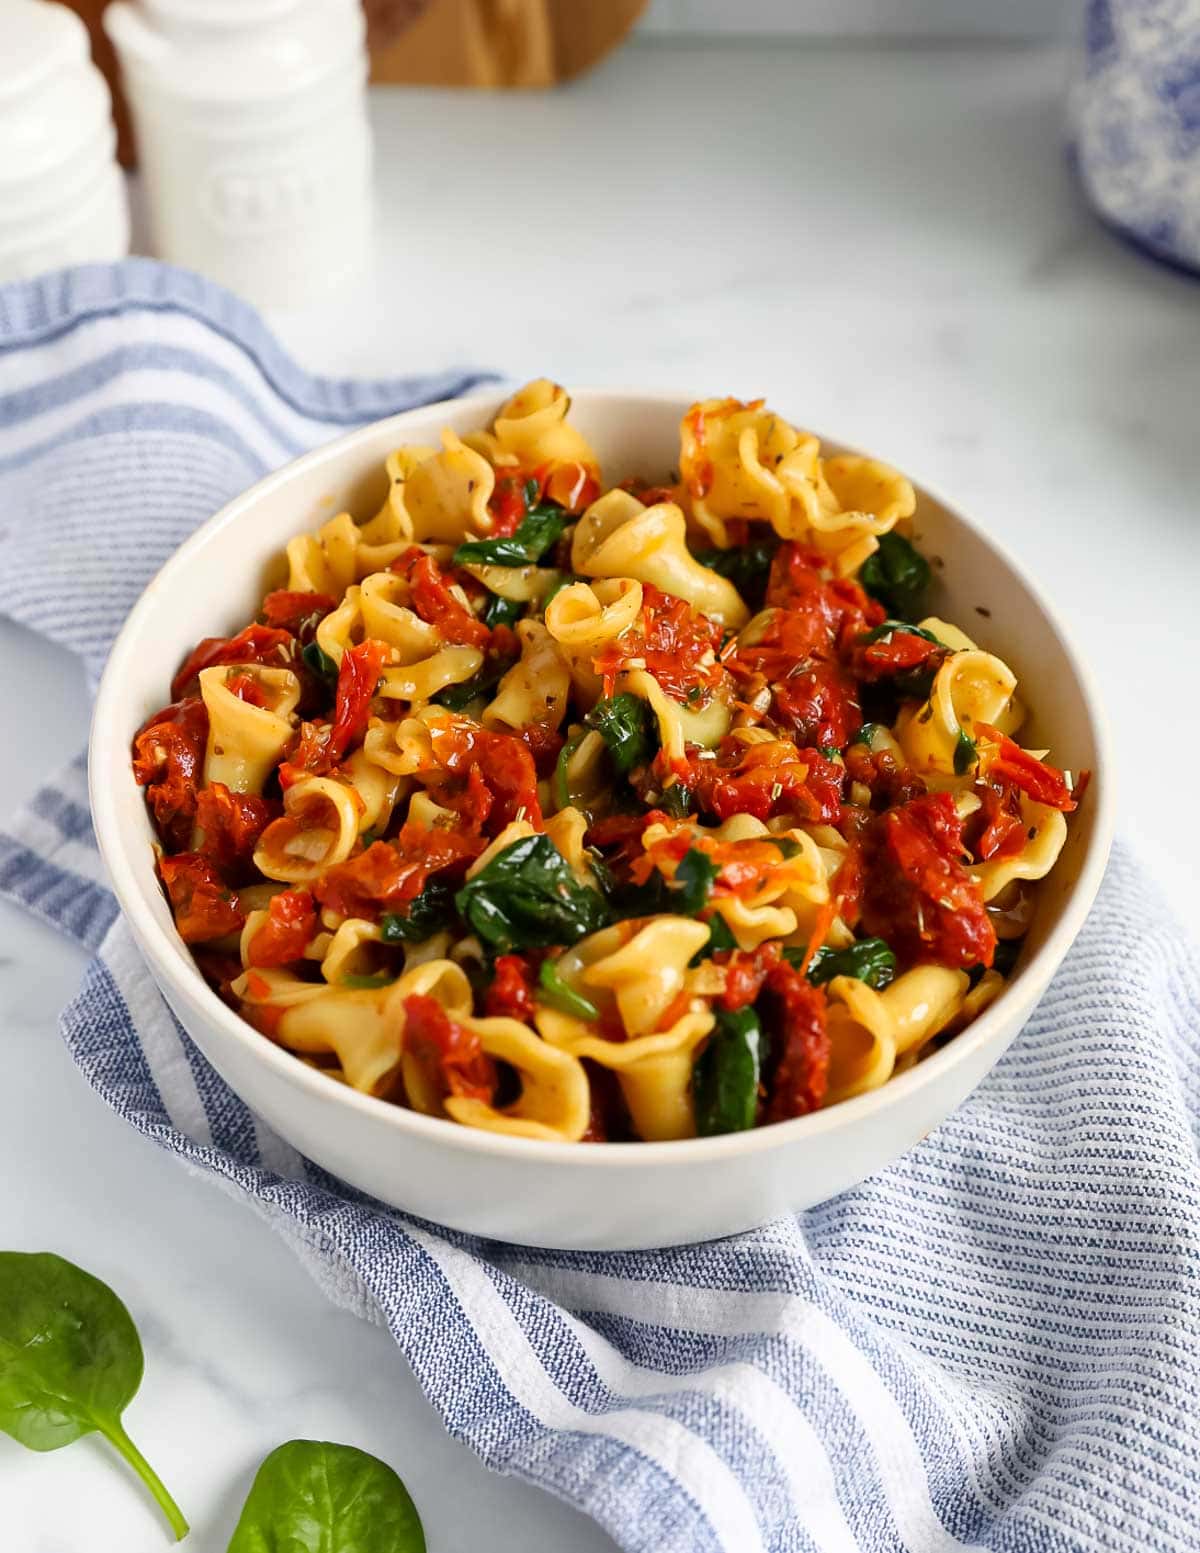 A white bowl filled with a large amount of cooked pasta with a tomato/spinach sauce on top.